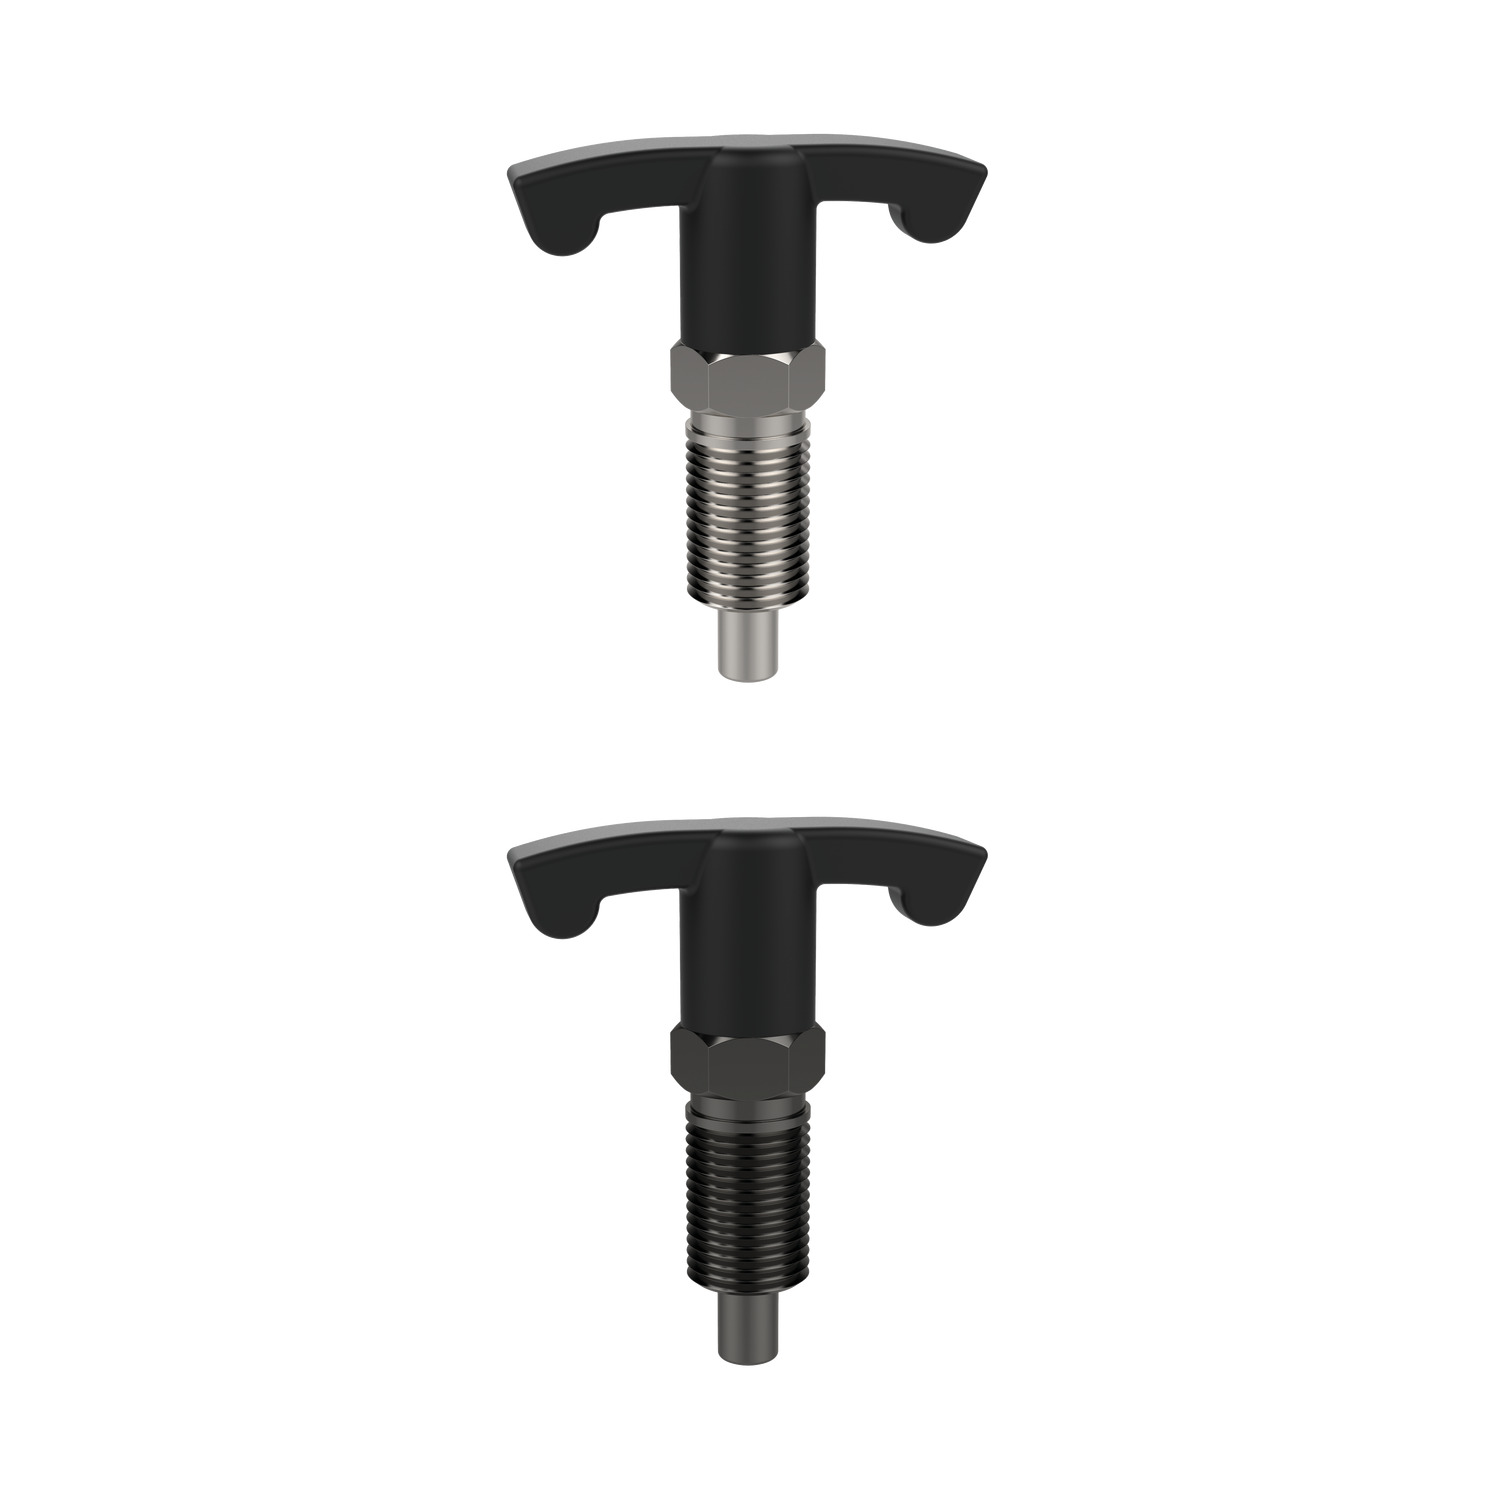 Index Plungers - T-handle Grip T-handle grip, non-locking index plungers. Easy to grip handle helps improved handling when using safety gloves or other situations when an operator has limited dexterity.